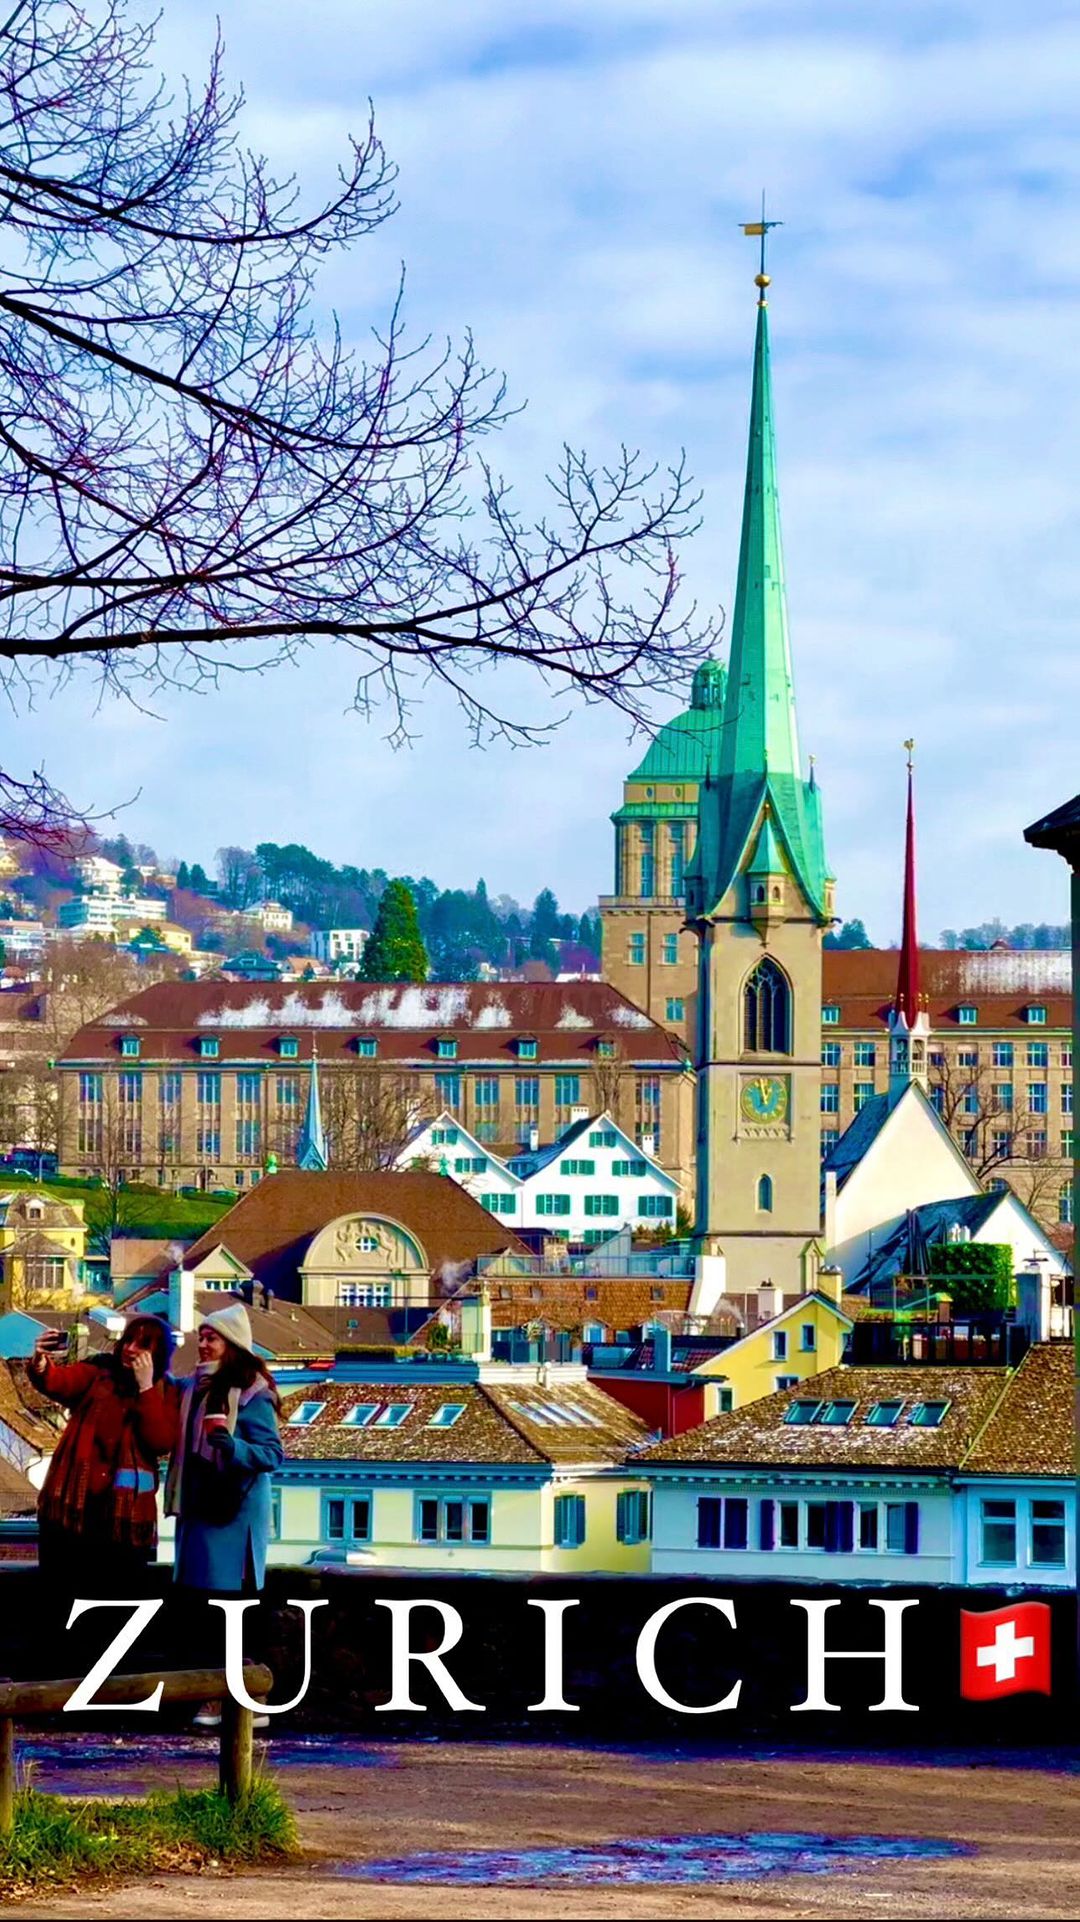 4-Day Cultural and Culinary Exploration of Zurich and Surroundings